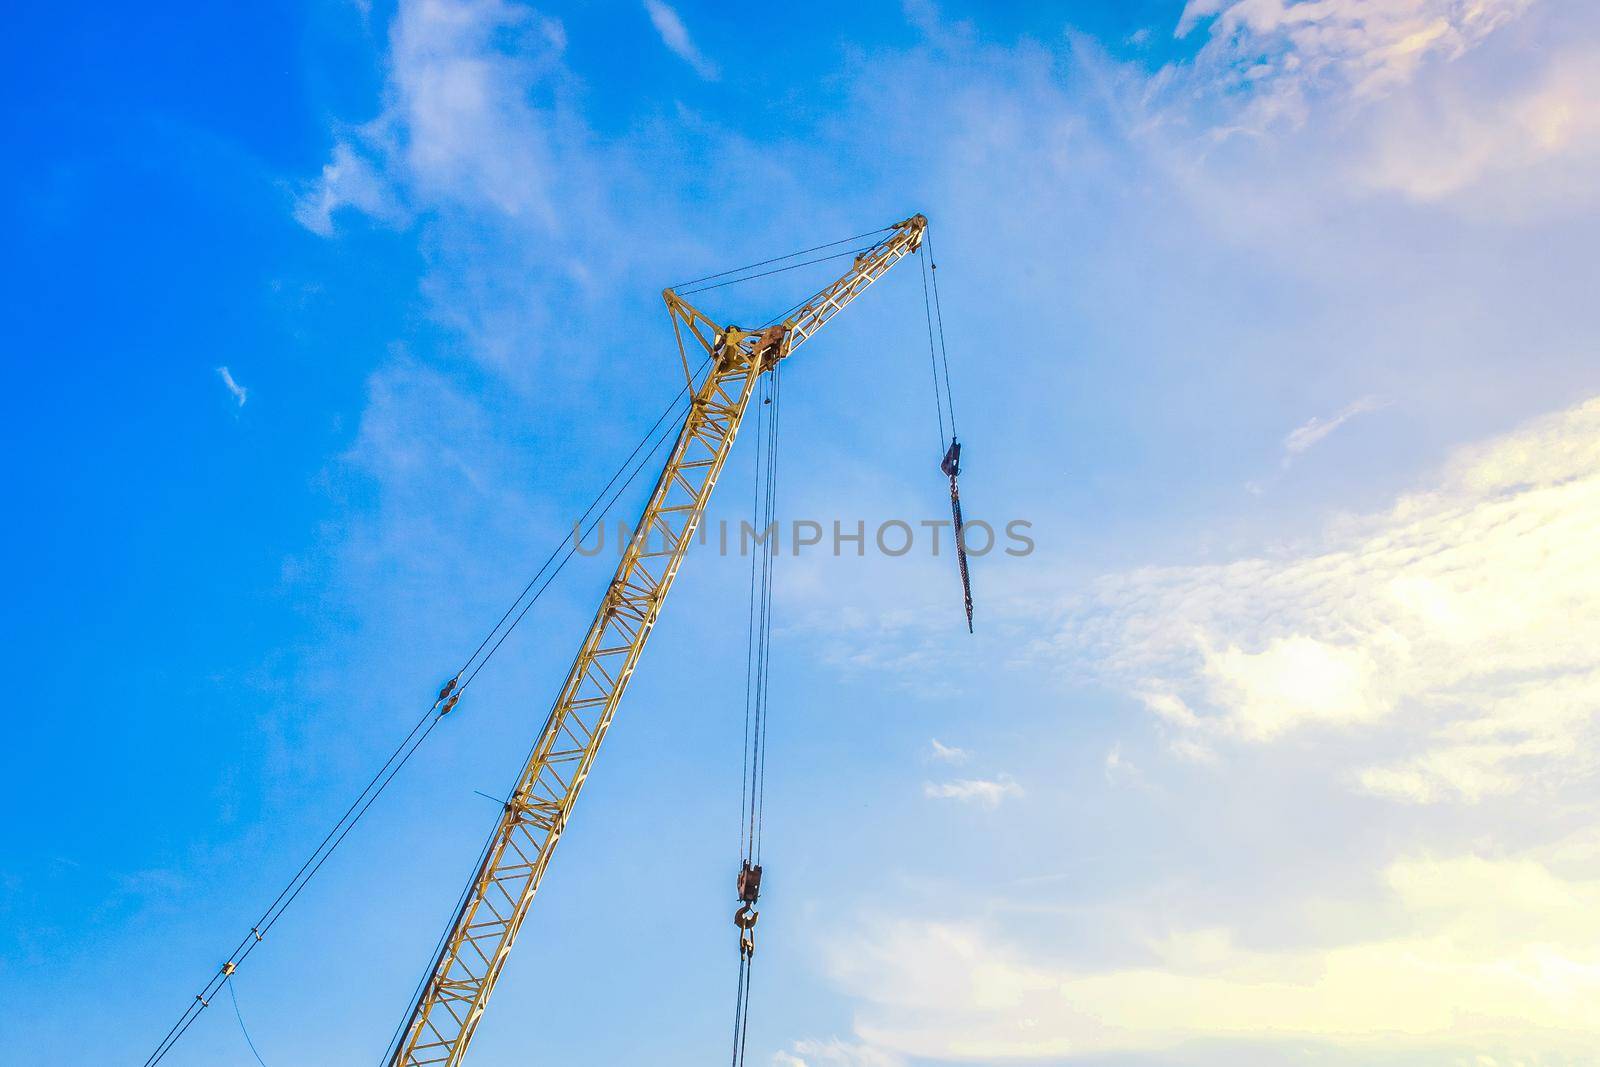 Hoisting machine industrial crane equipment against blue sky at construction site by AYDO8